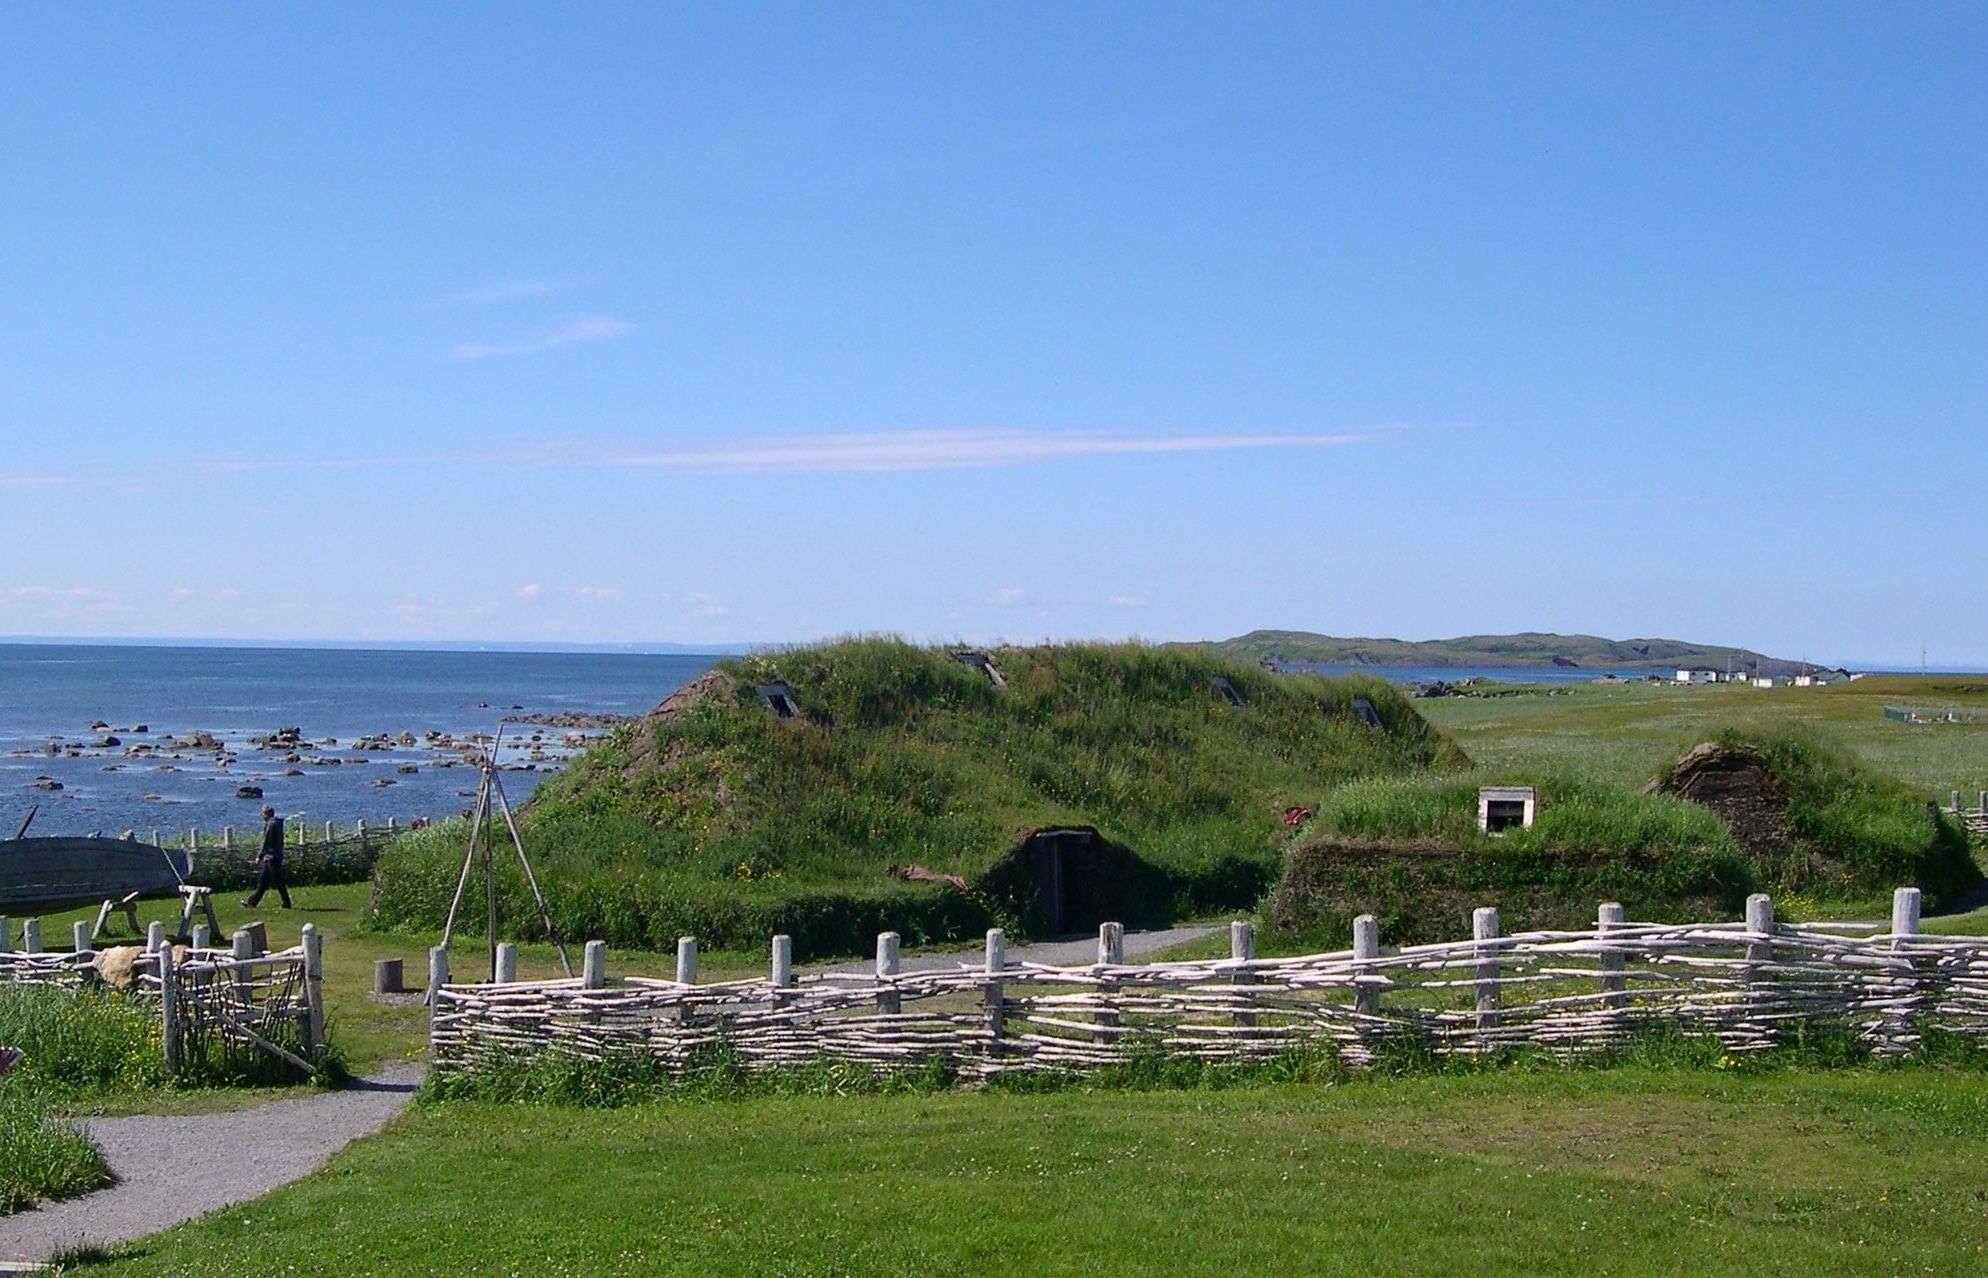 A recreation of Viking structures at L’Anse aux Meadows Dylan Kereluk via Wikimedia Commons under CC by 2.0